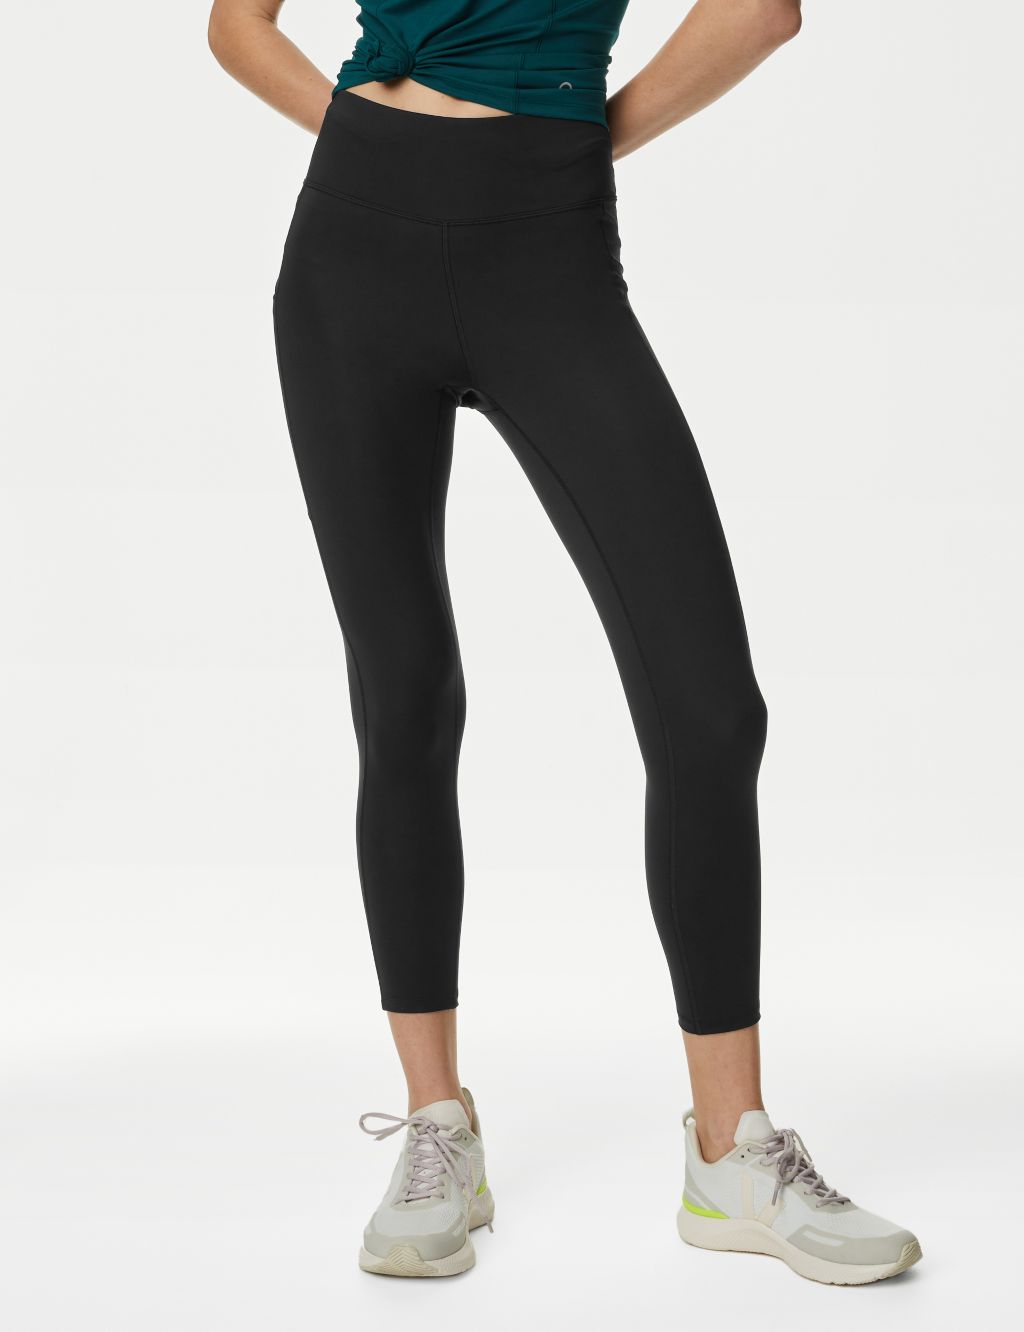 The M&S Go Move Gym Leggings Are So Popular, Here's Why